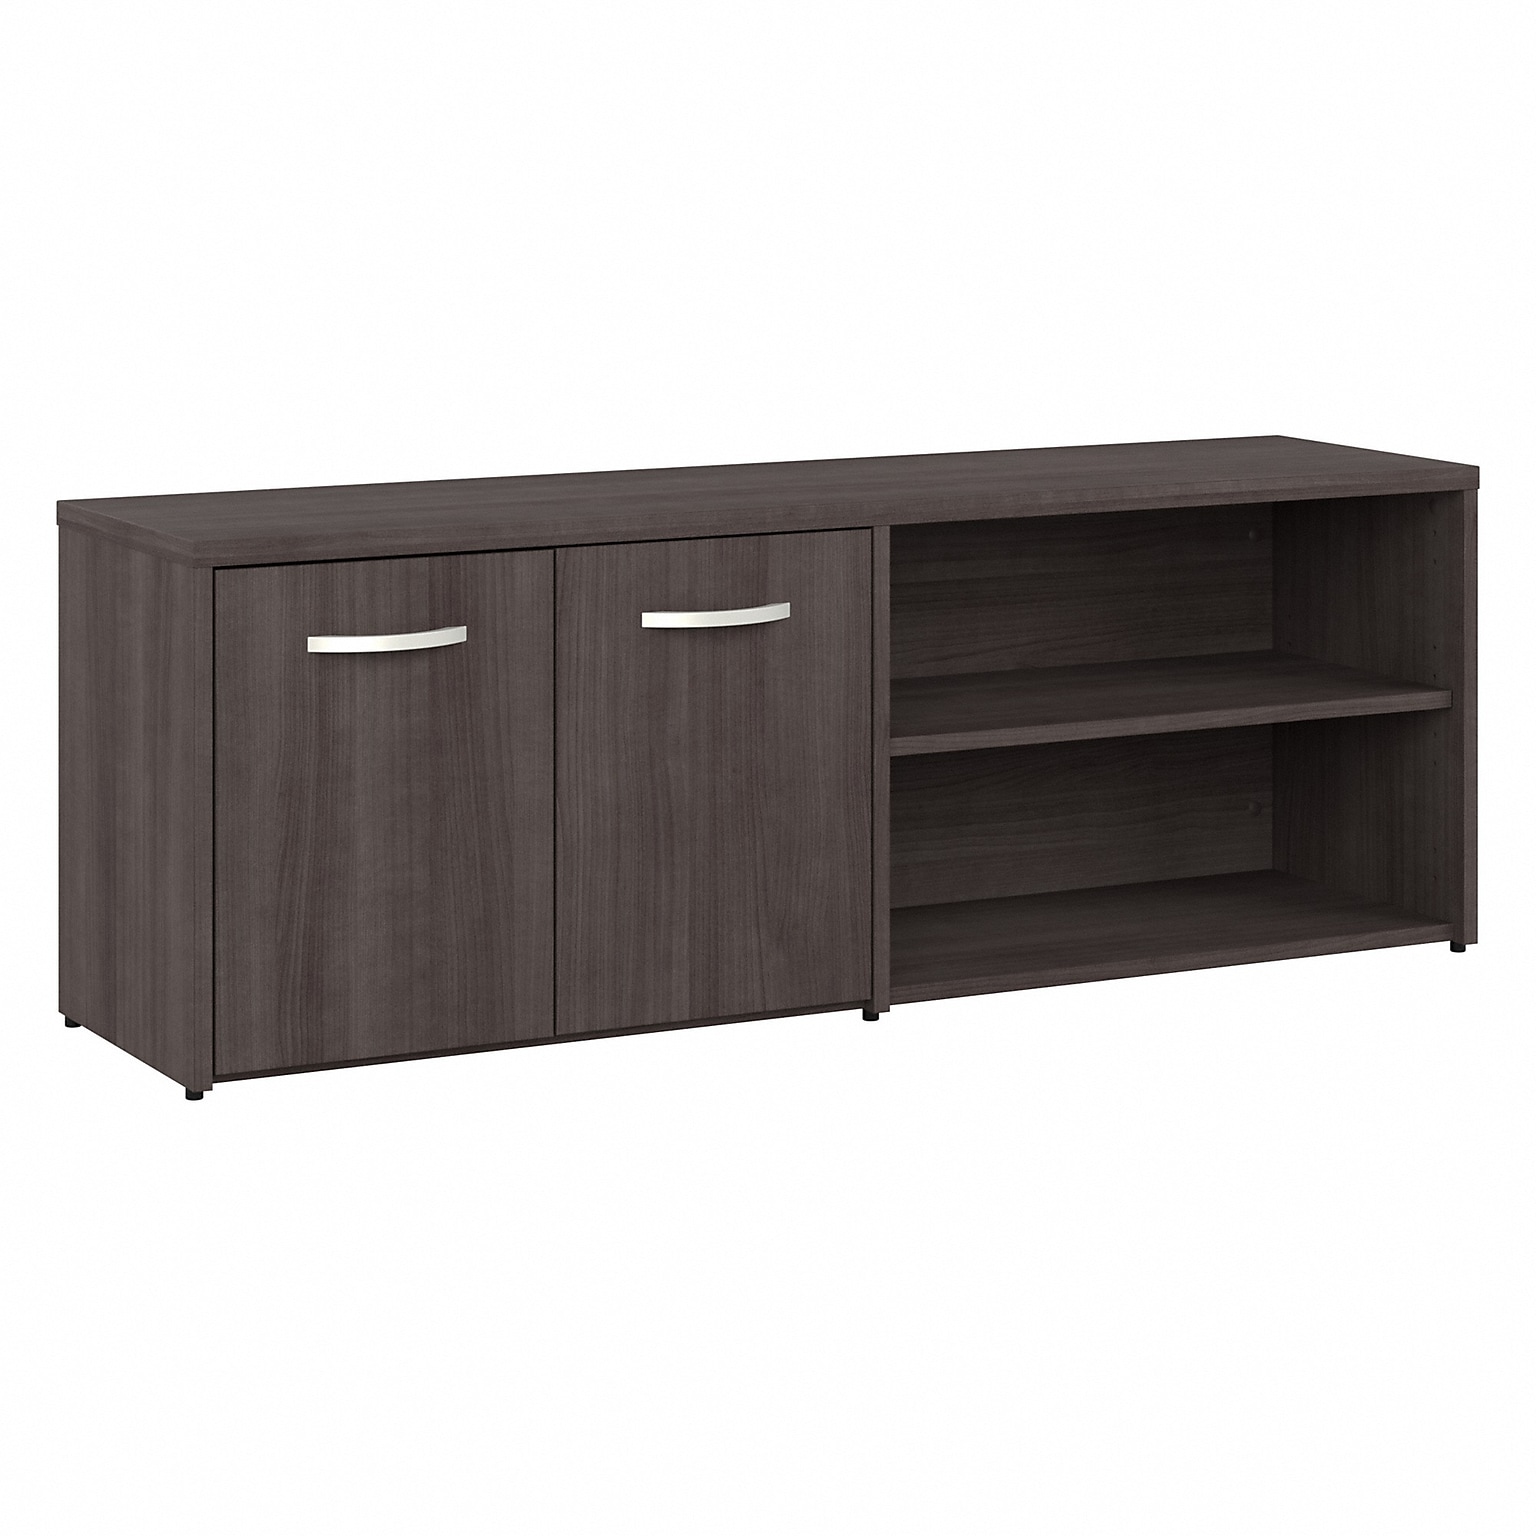 Bush Business Furniture Studio A 21 Low Storage Cabinet with 4 Shelves and Doors, Storm Gray (SDS160SG-Z)